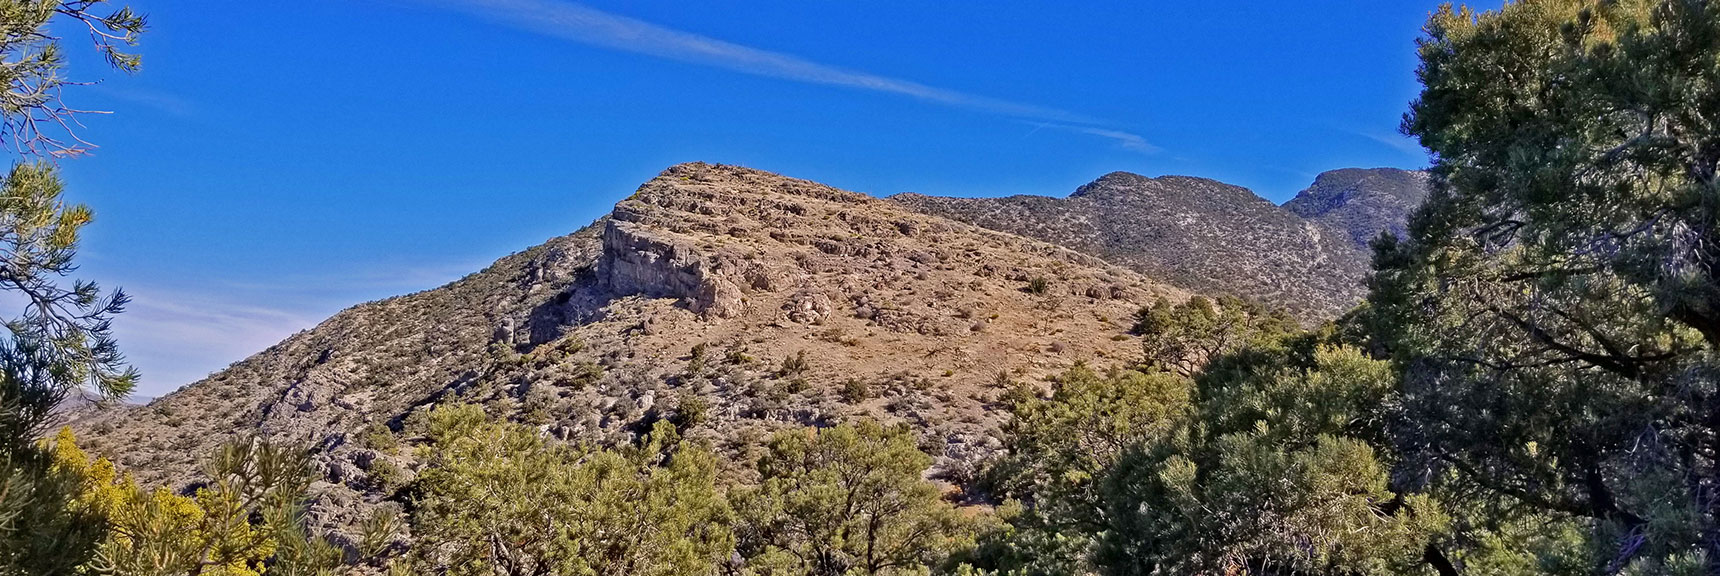 2nd Bluff Comes Into View While Rounding 1st Bluff | Potosi Mt. Summit via Western Cliffs Ridgeline, Spring Mountains, Nevada